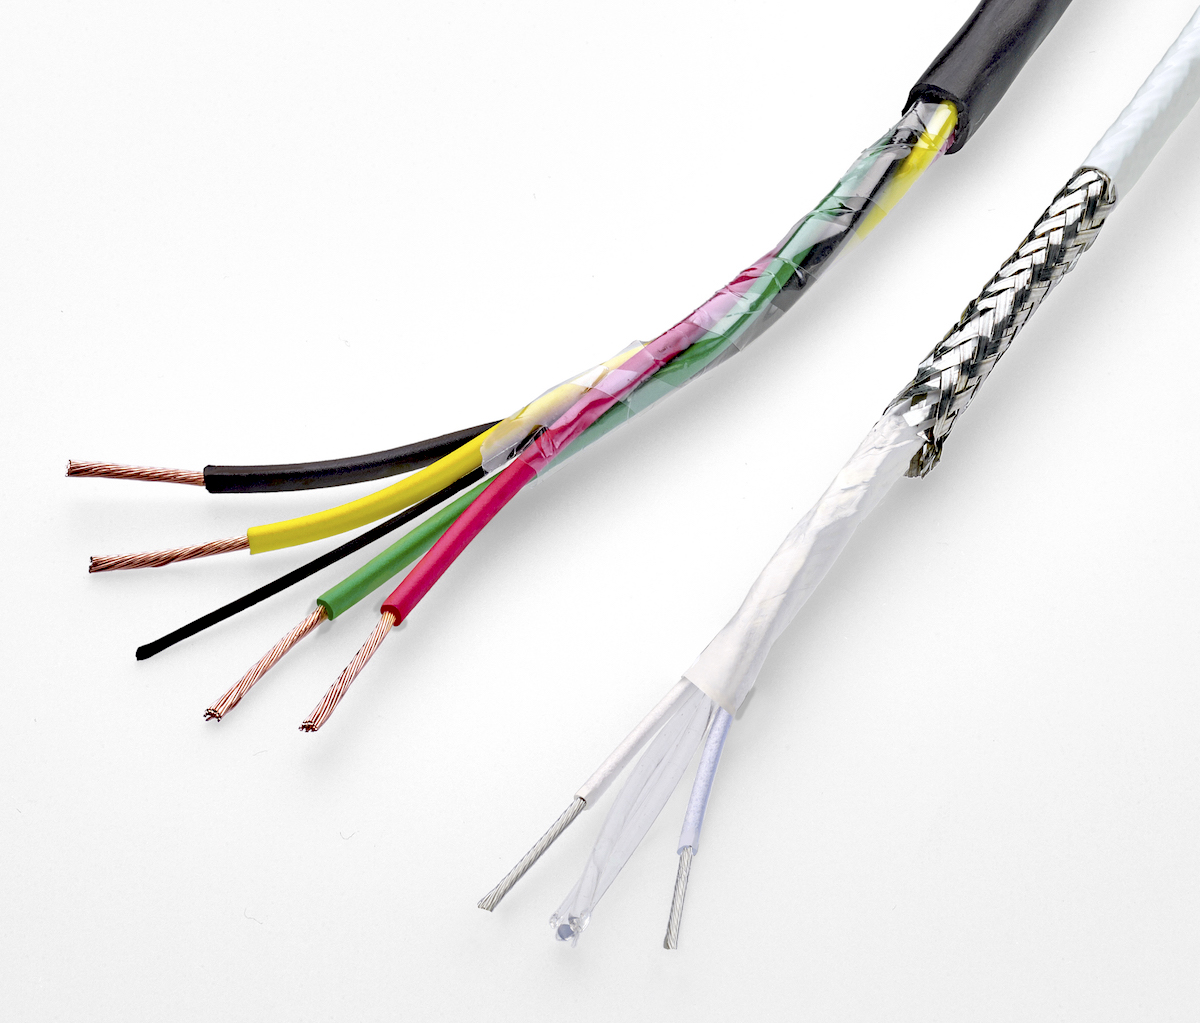 Interconnect solutions for cabin and IFE applications: TE Connectivity’s new line of Raychem CANbus (controller area network) cables